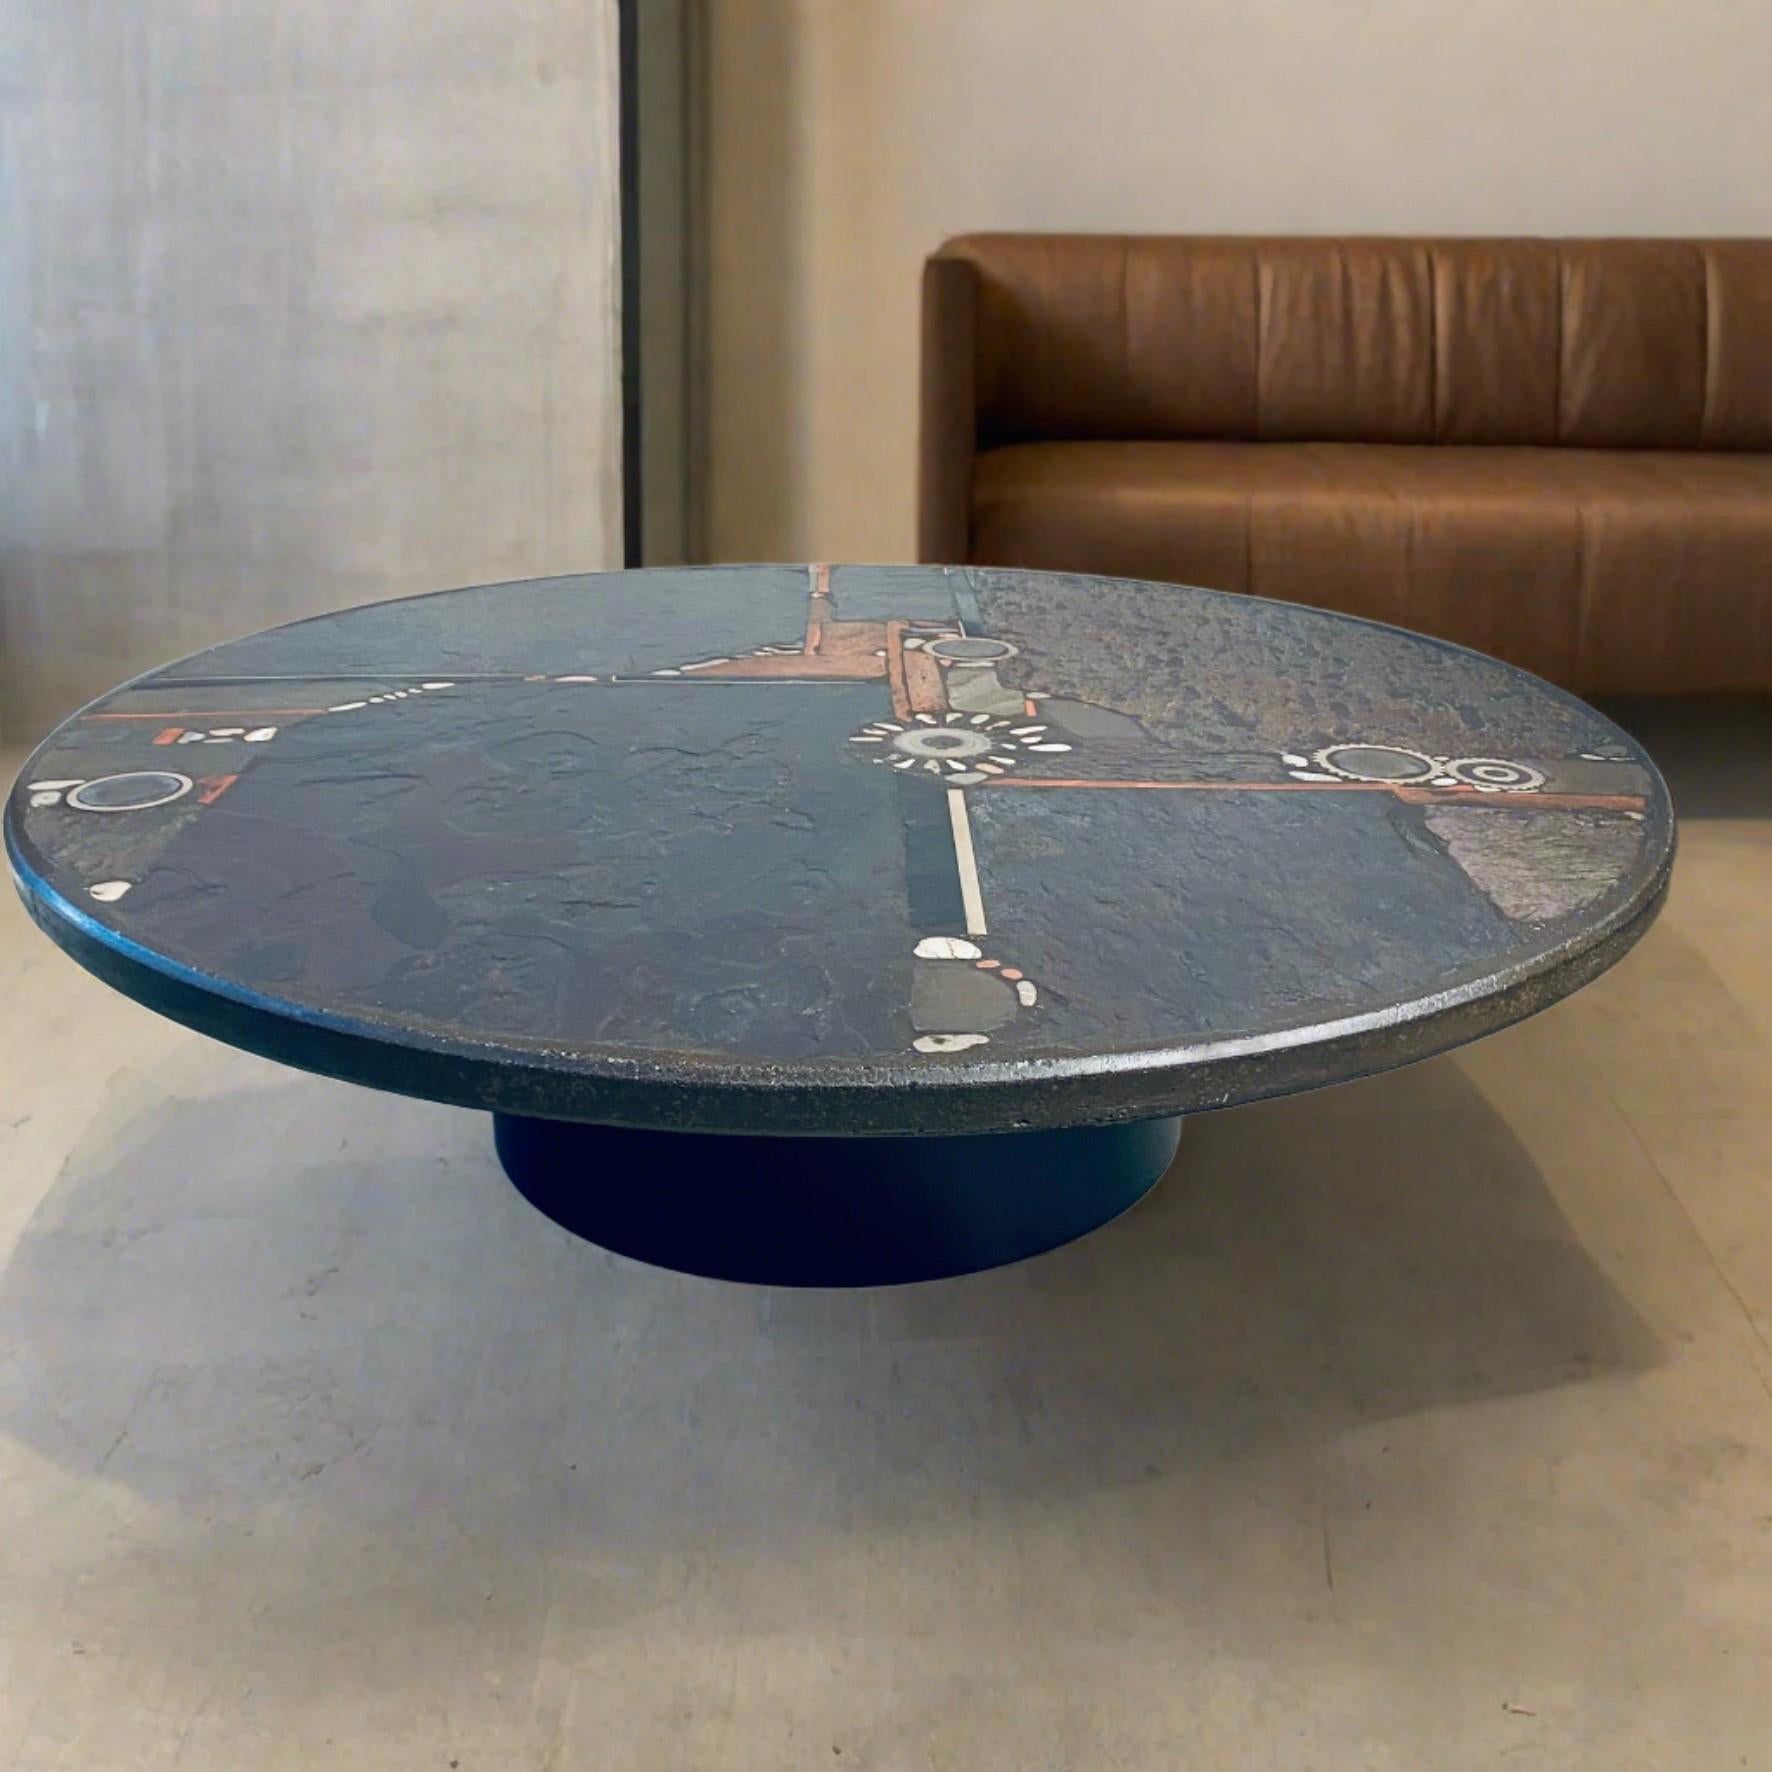 Dutch Brutalist Round Coffee Table by Sculptor Paul Kingma, Netherlands, 1984 For Sale